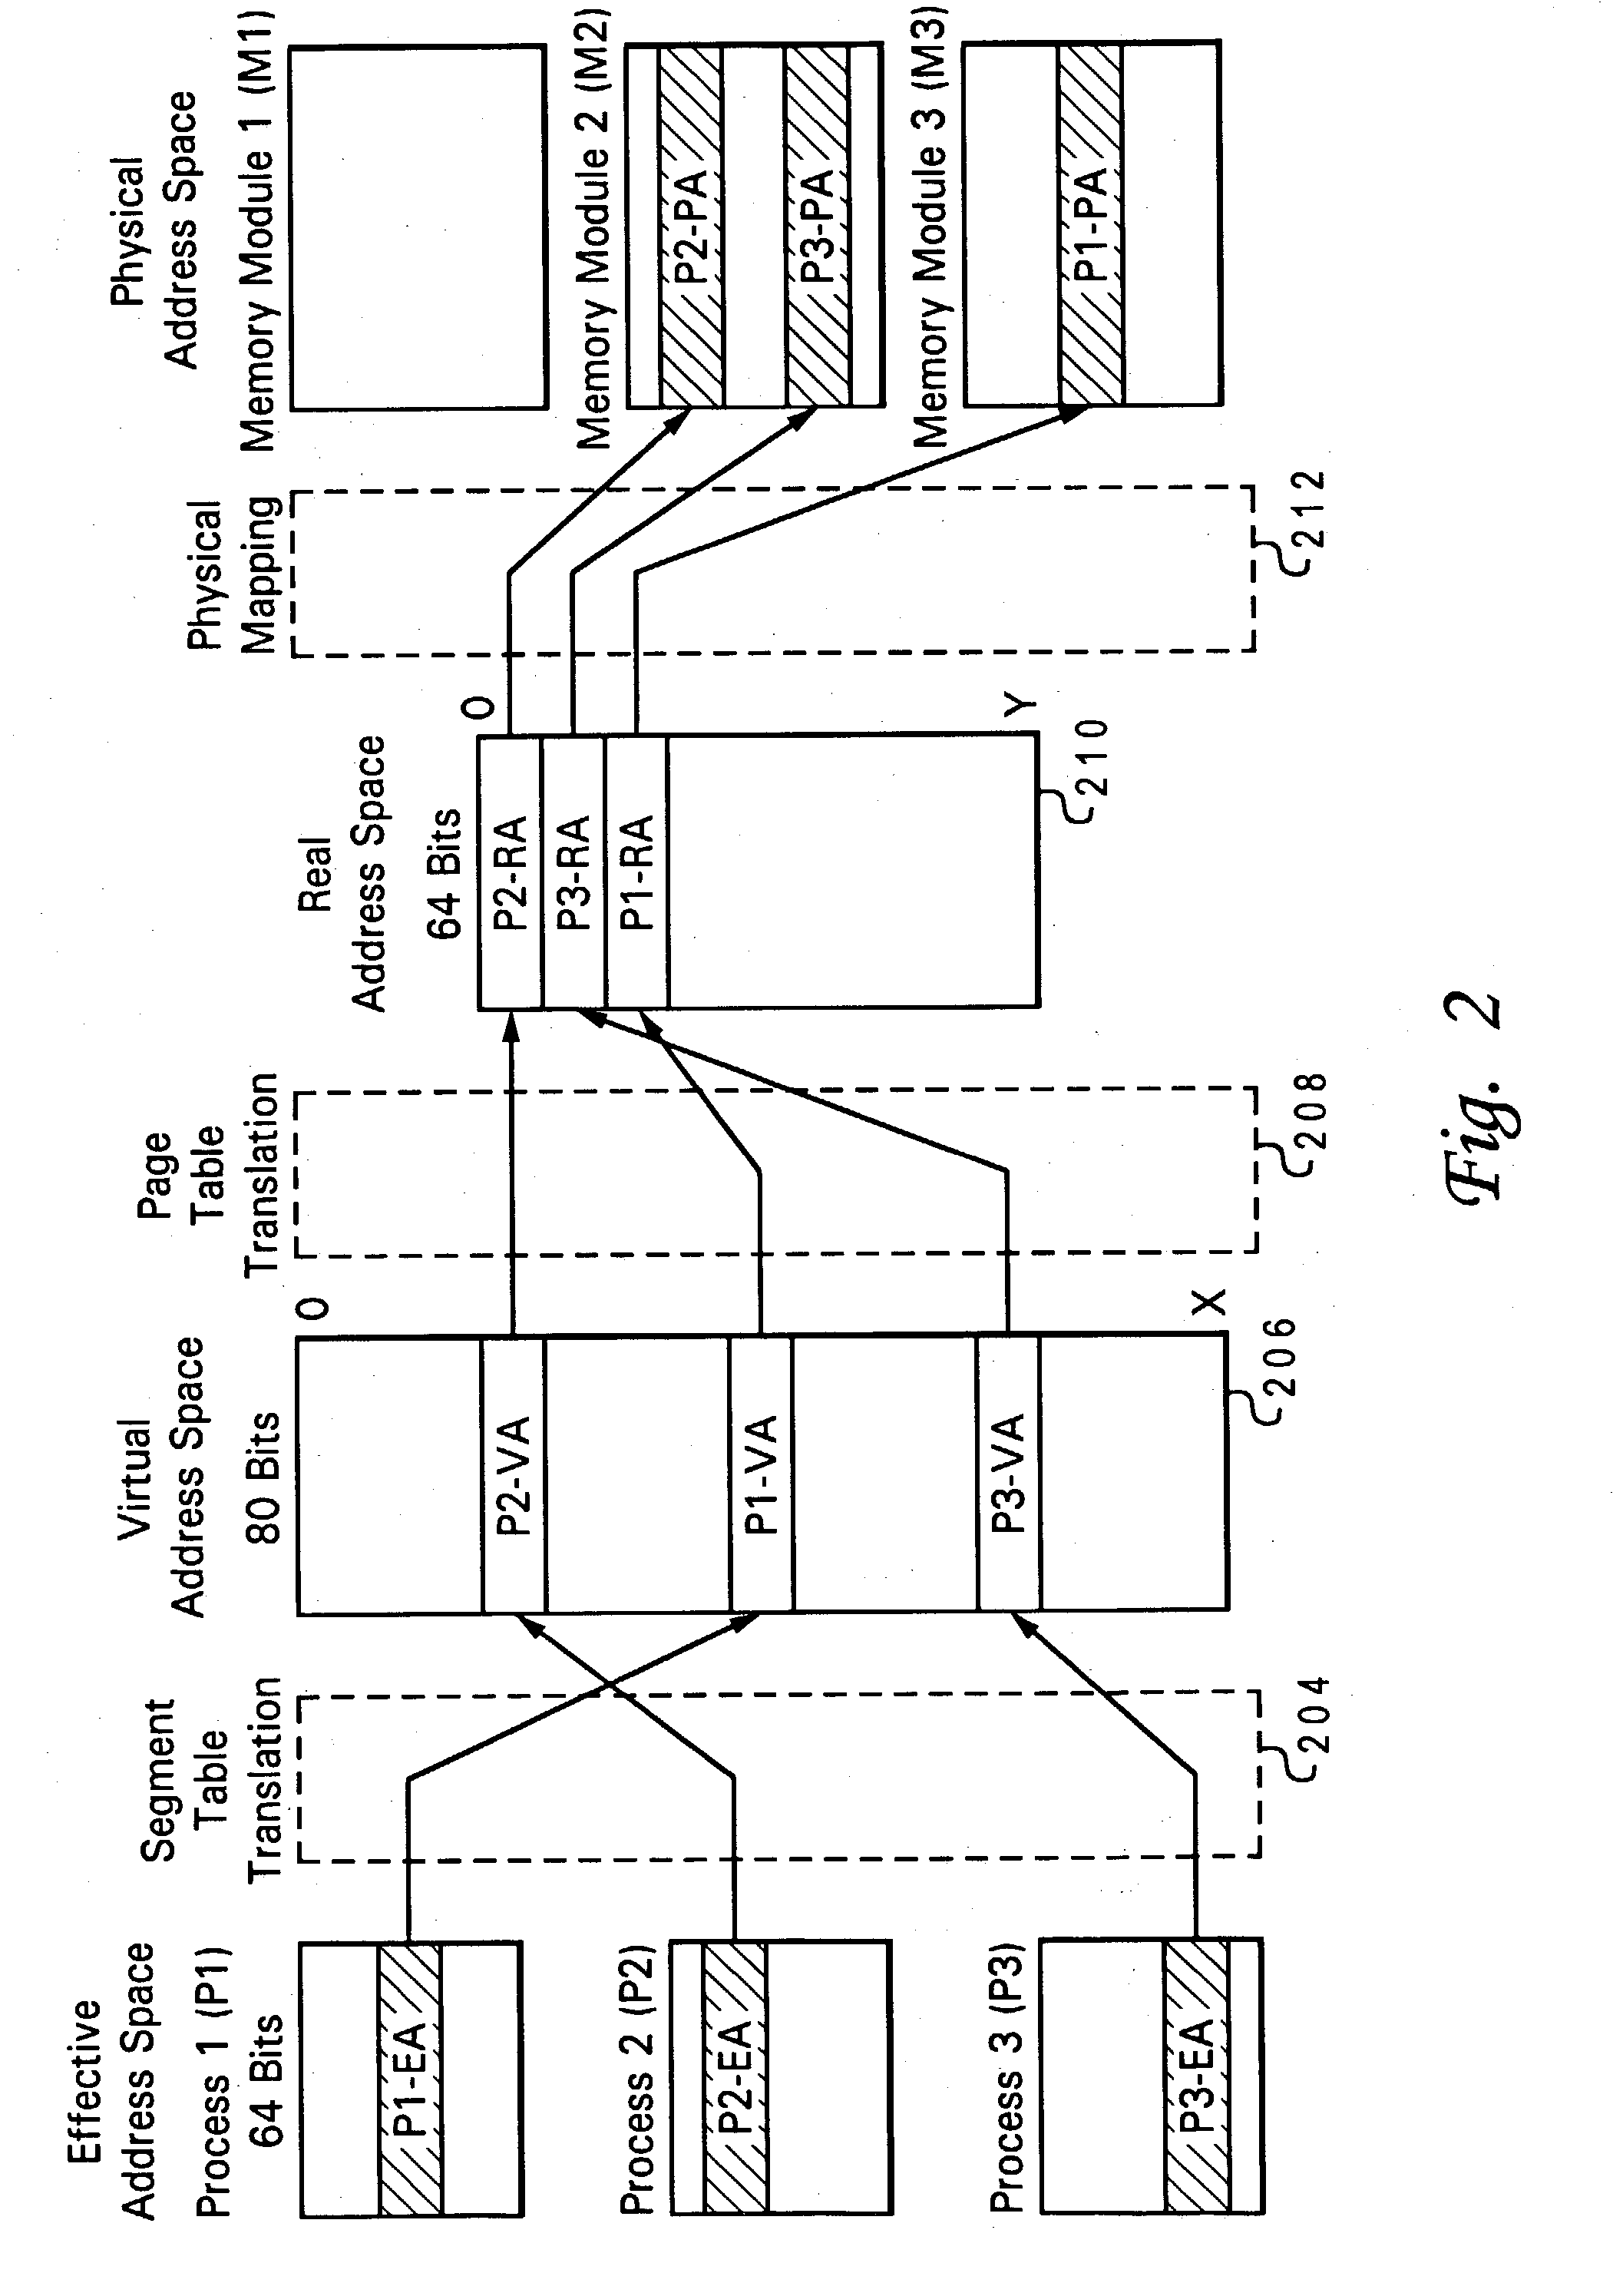 Method and system of managing virtualized physical memory in a data processing system